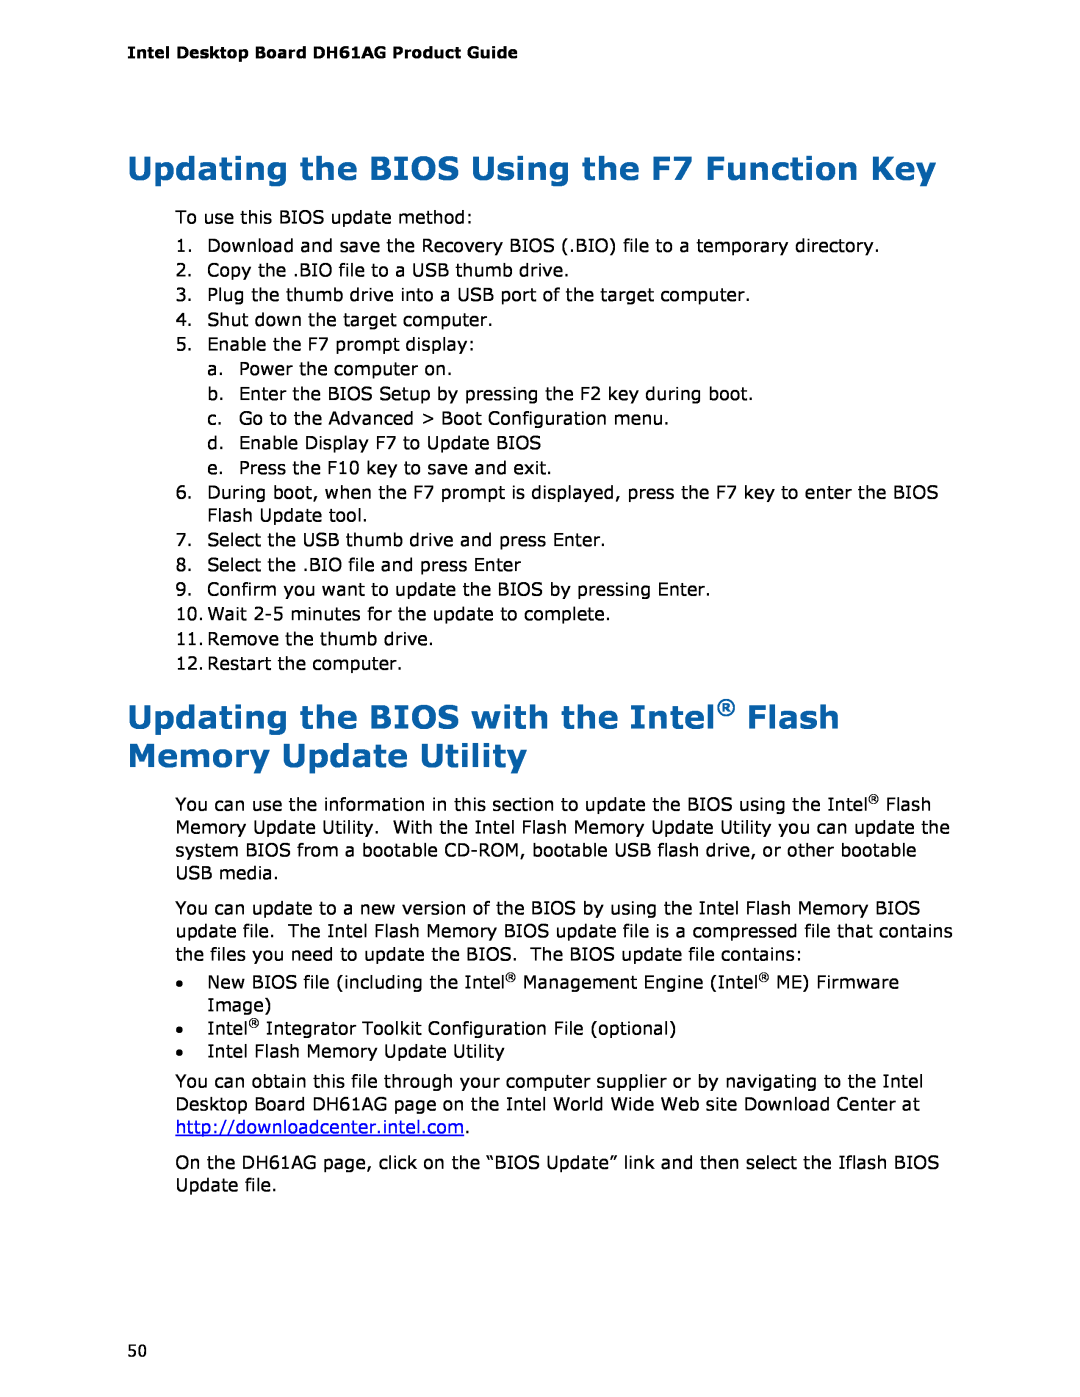 Intel BOXDH61AG Updating the BIOS Using the F7 Function Key, Updating the BIOS with the Intel Flash Memory Update Utility 